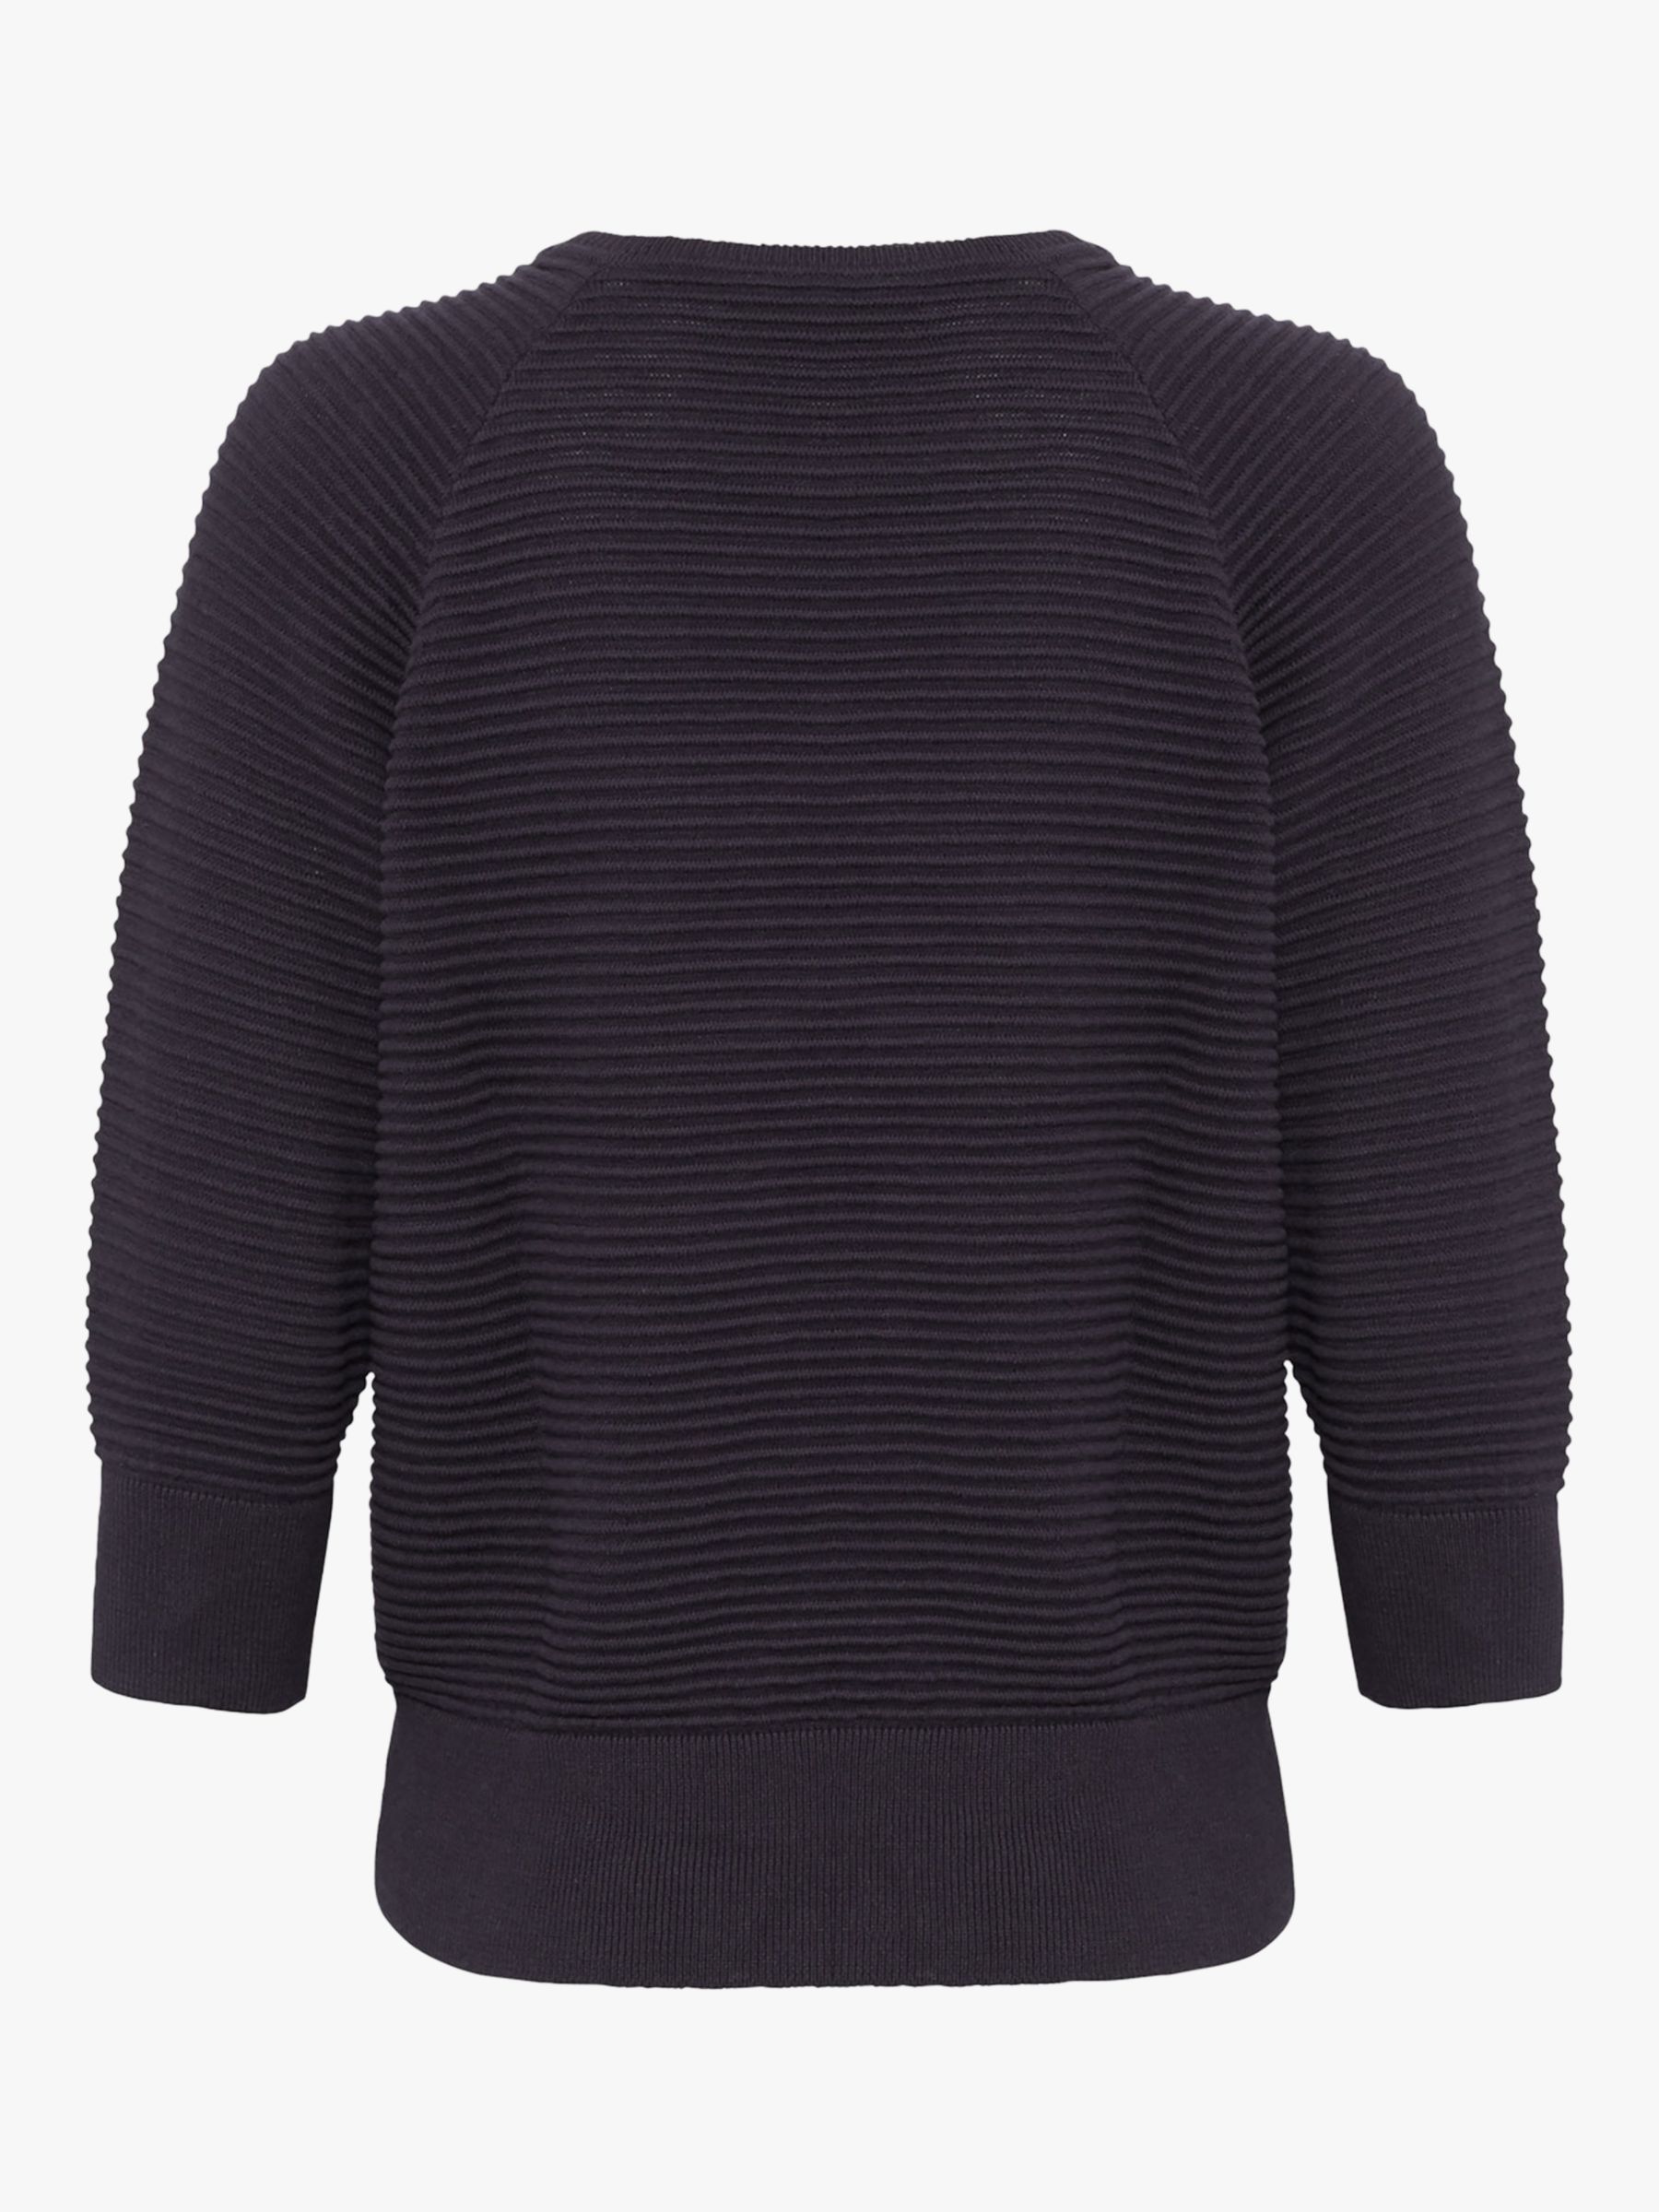 French Connection Crew Neck Jumper, Utility Blue at John Lewis & Partners